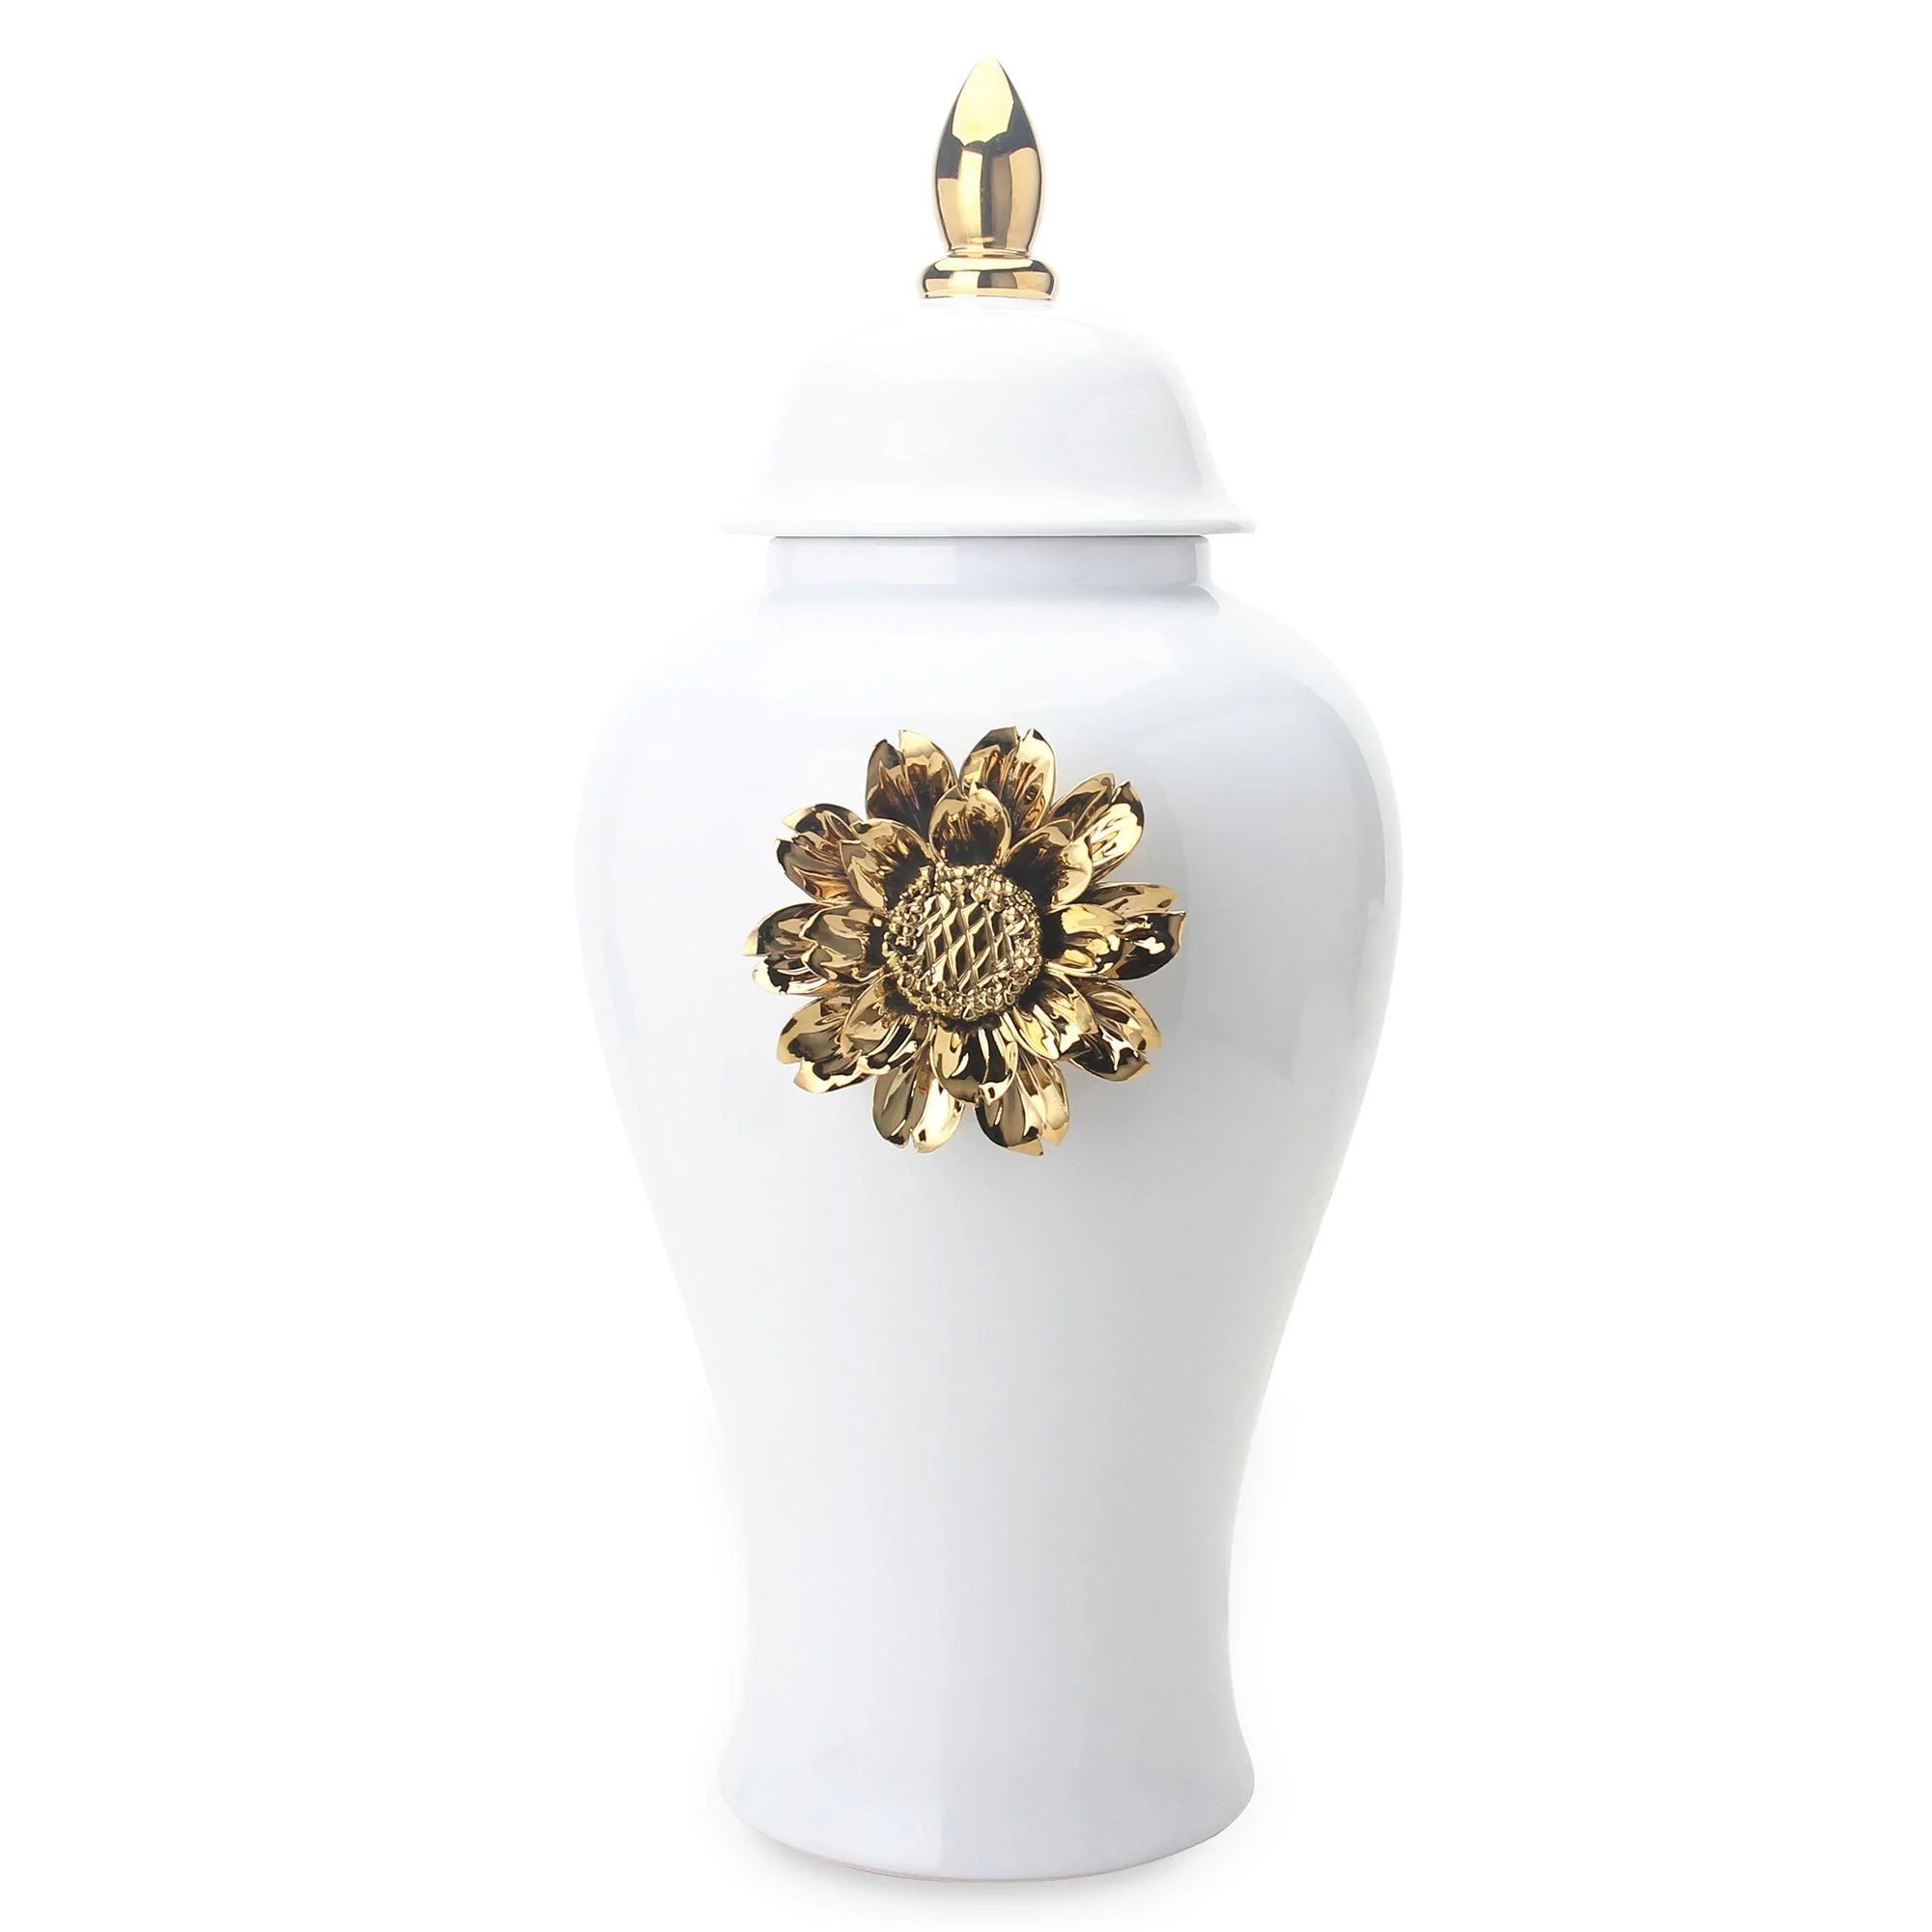 MAICOSY White Ginger Jar With Gilded Flower - Timeless Home Decor | Walmart (US)